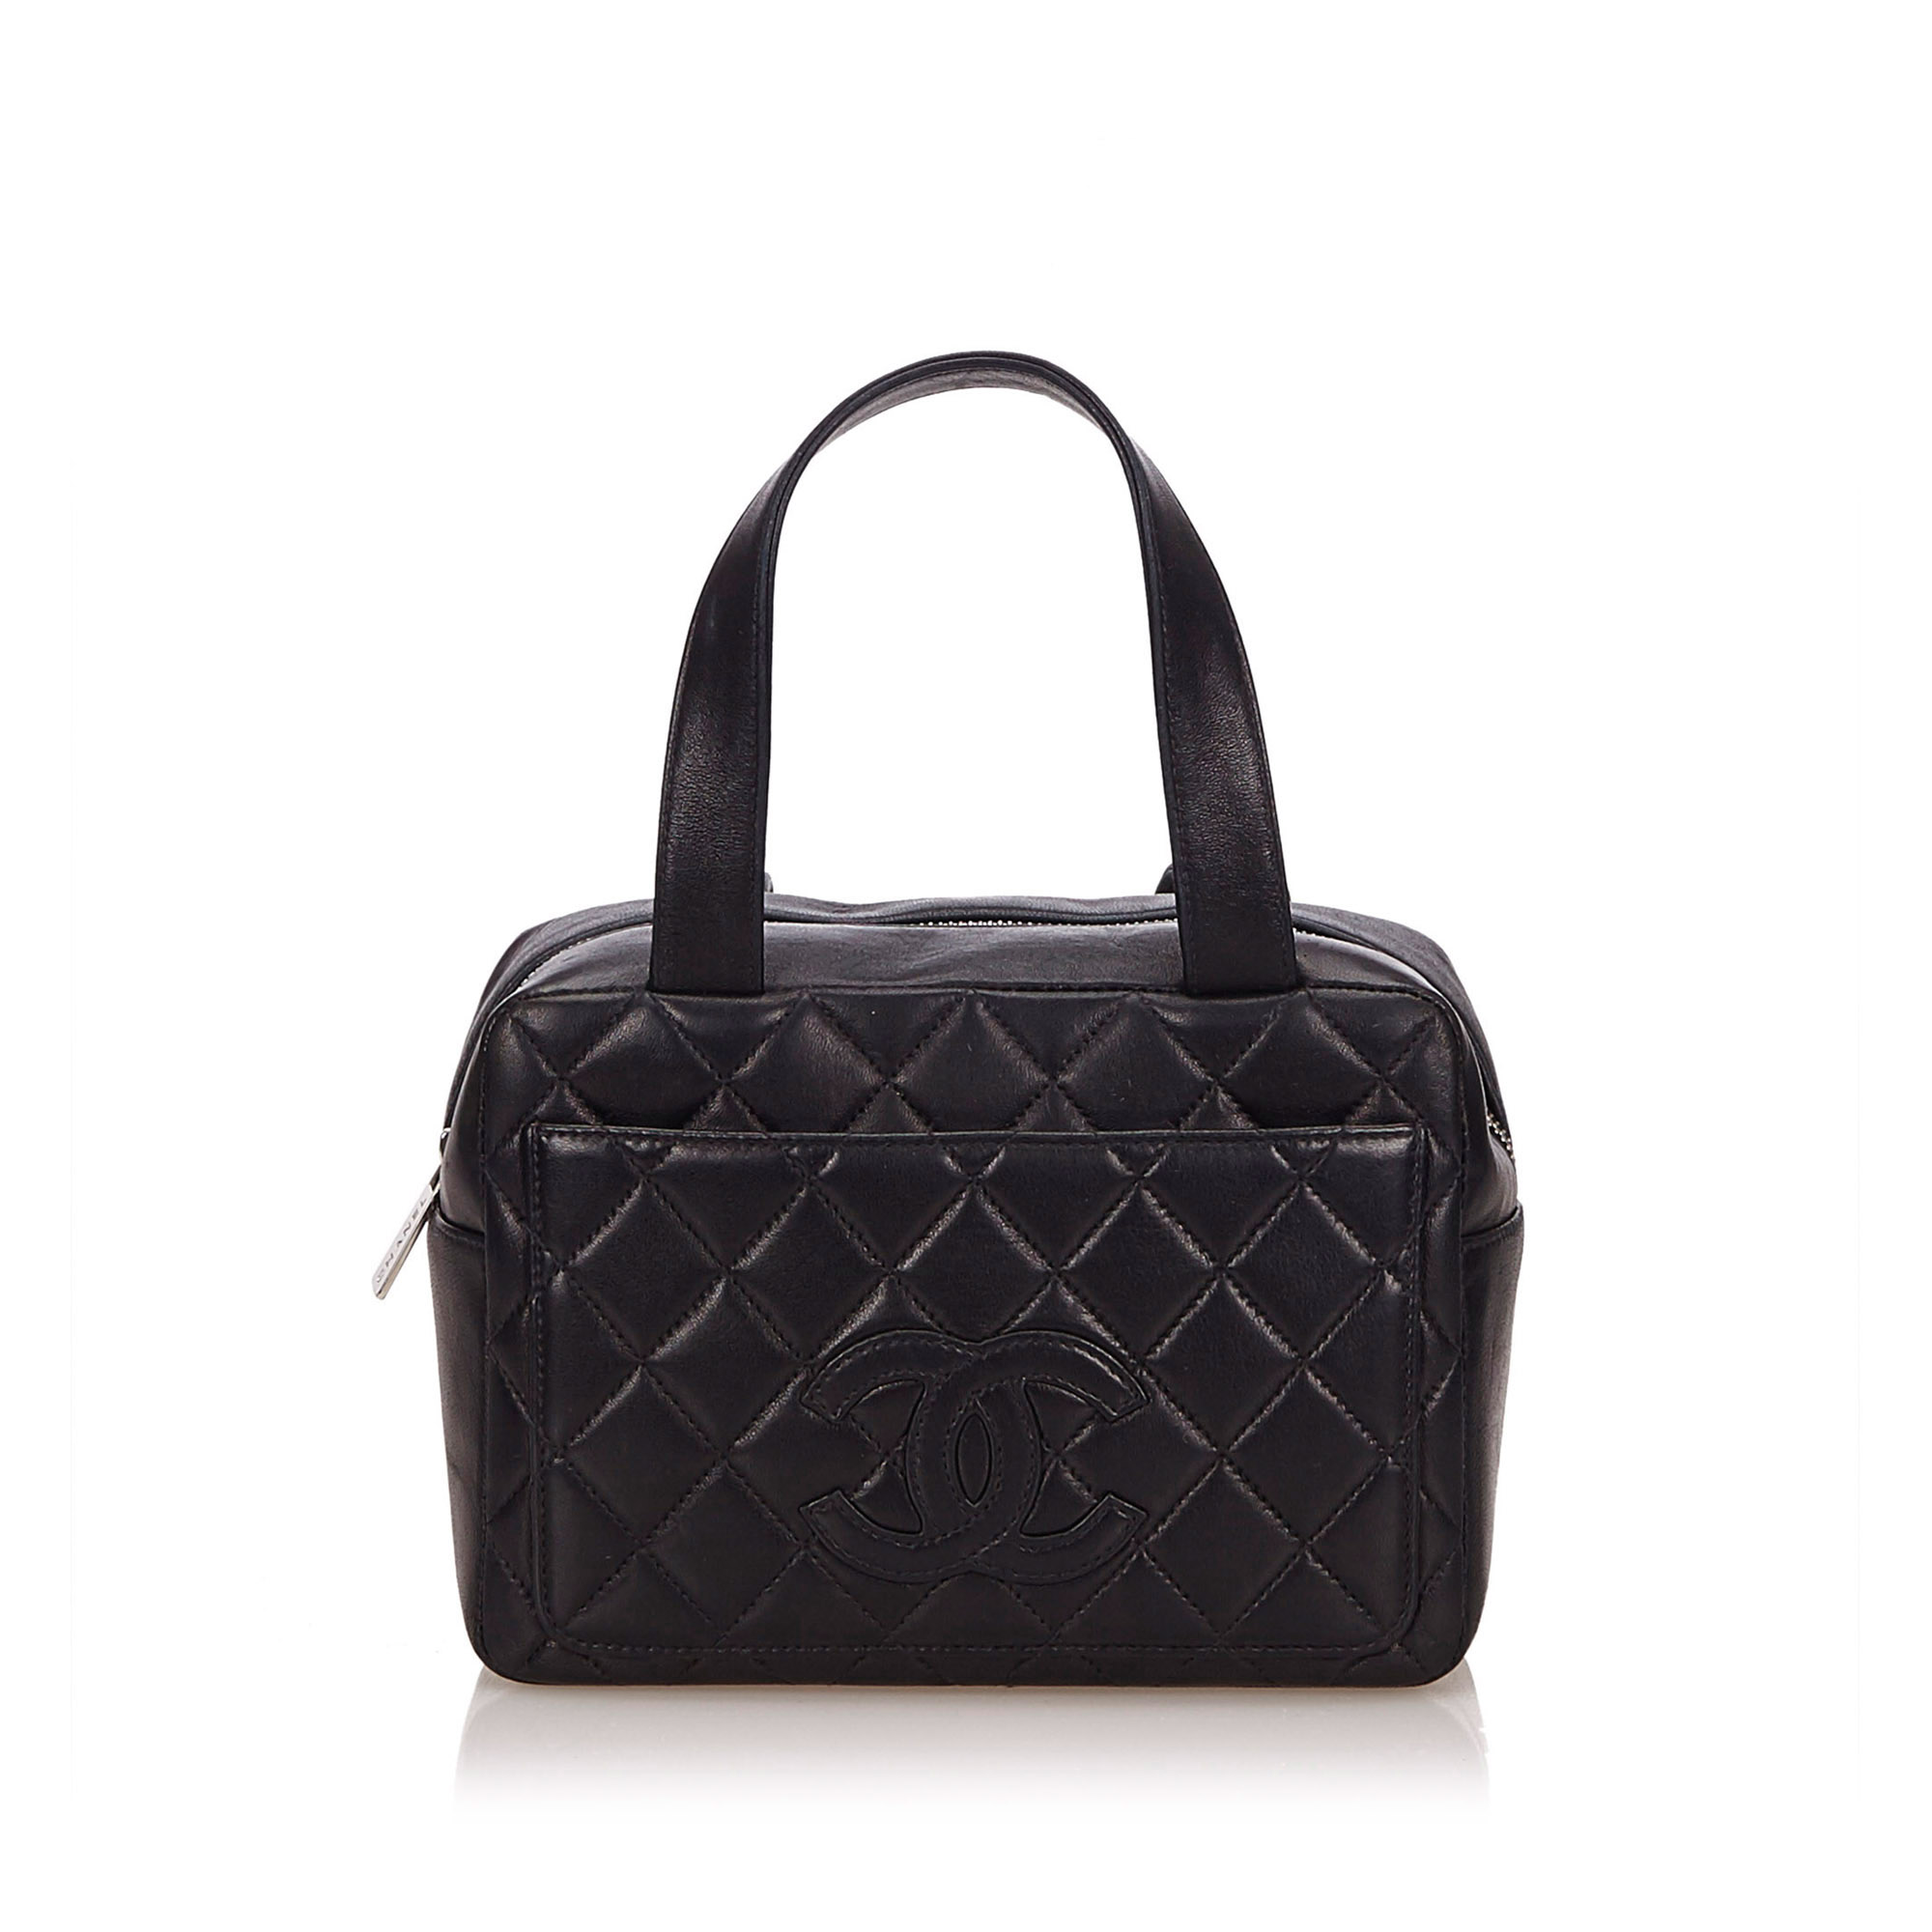 Chanel Matelasse Lambskin Leather Handbag, this handbag features a leather body, exterior front slip